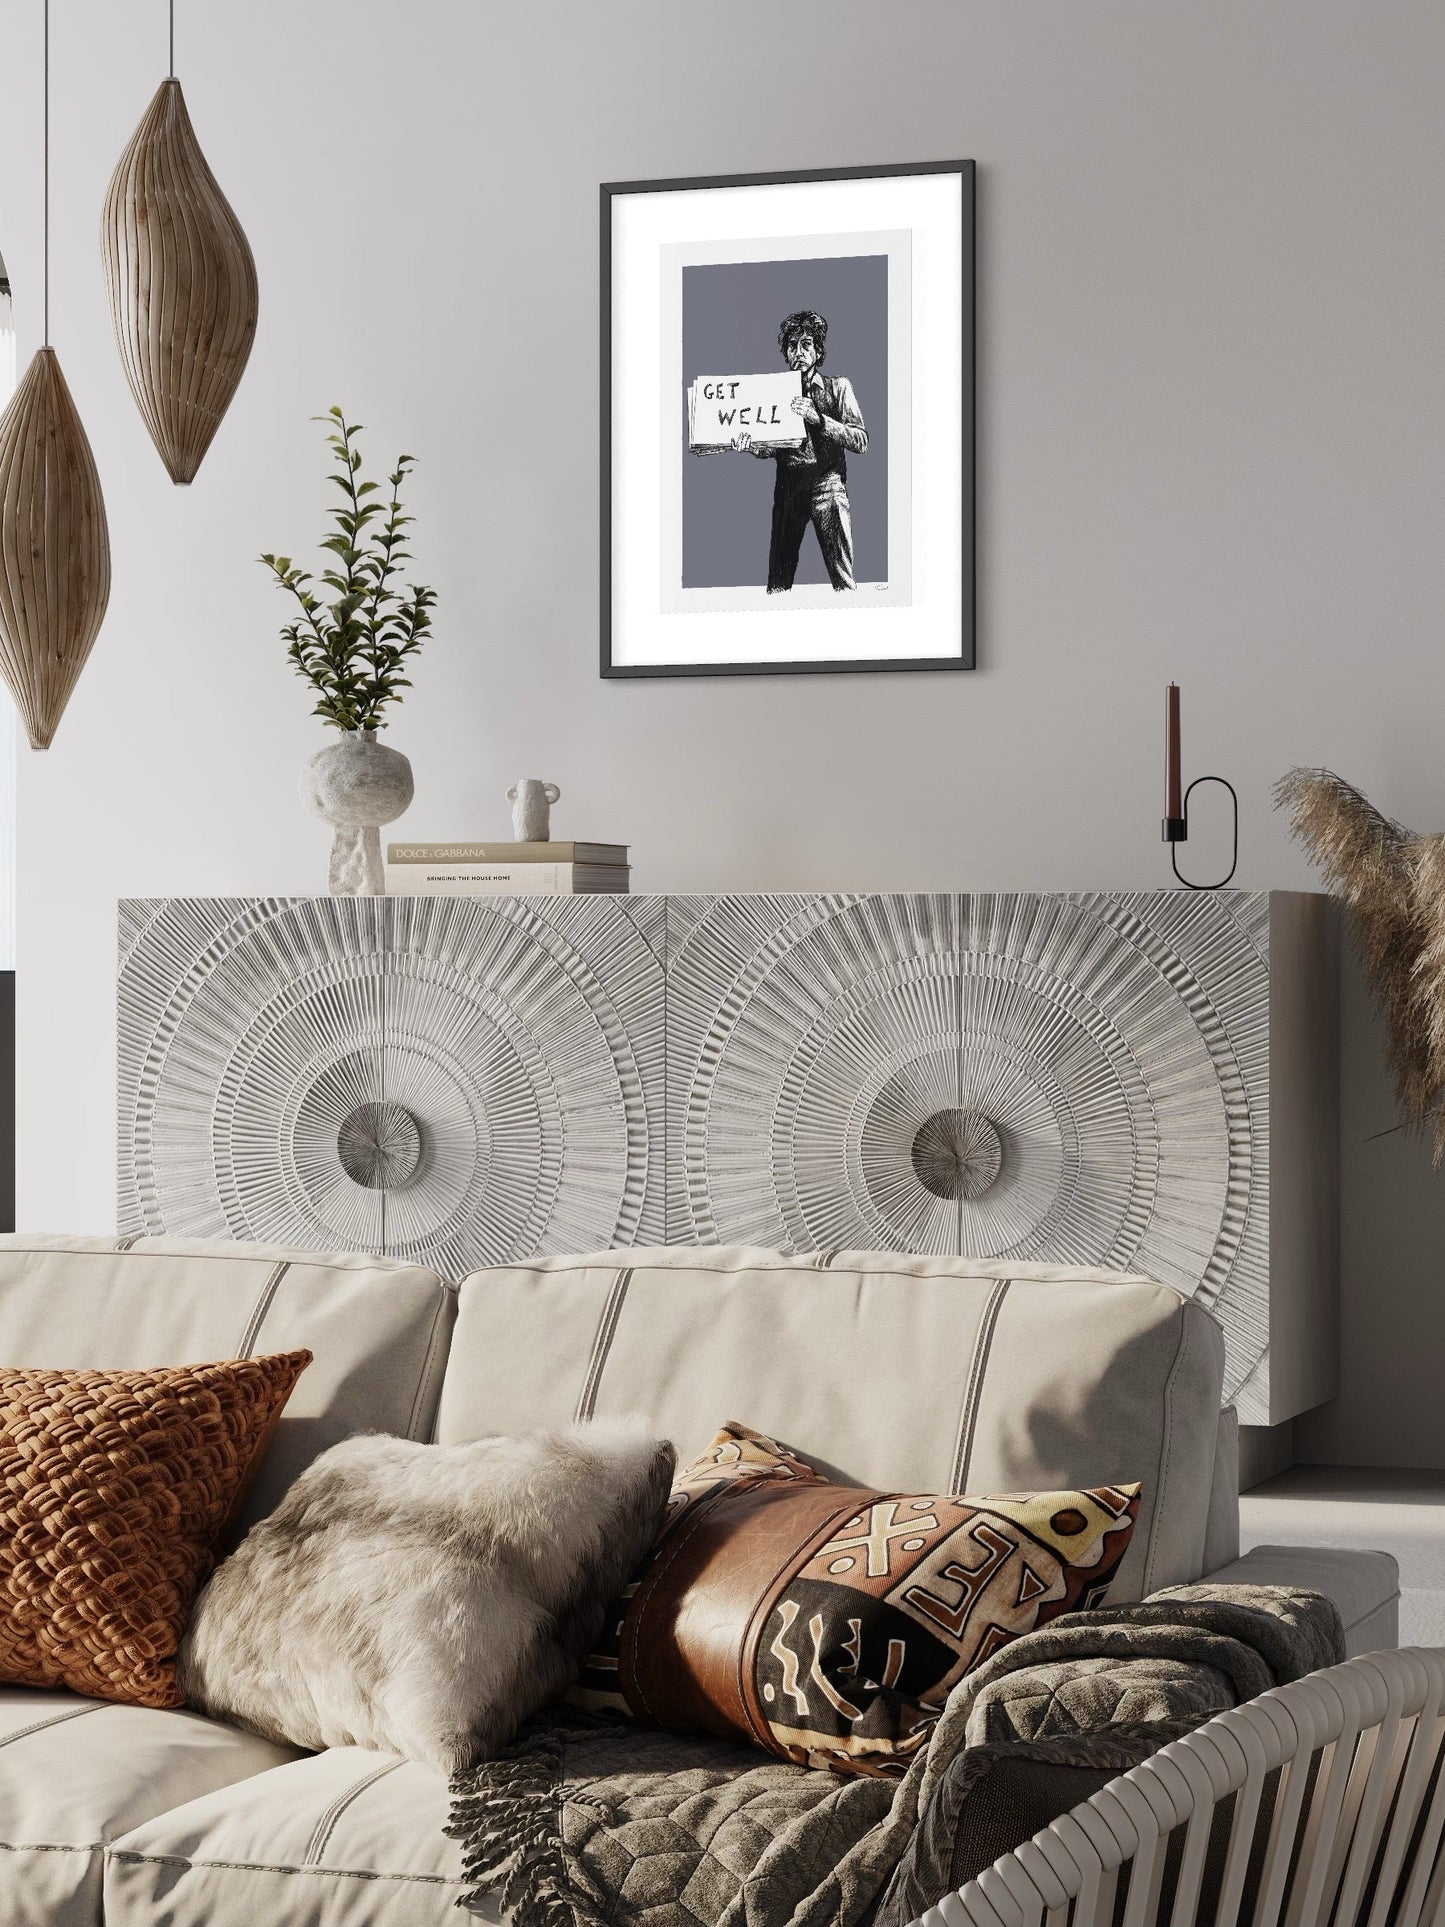 This image shows a giclee wall art print by Tom Laird Illustration of the great Bob Dylan in a Subterranean Homesick Blues music video style pose, framed in a beautiful room with tasteful modern home decor. This art print is available from Tom Laird Illustration in various sizes.